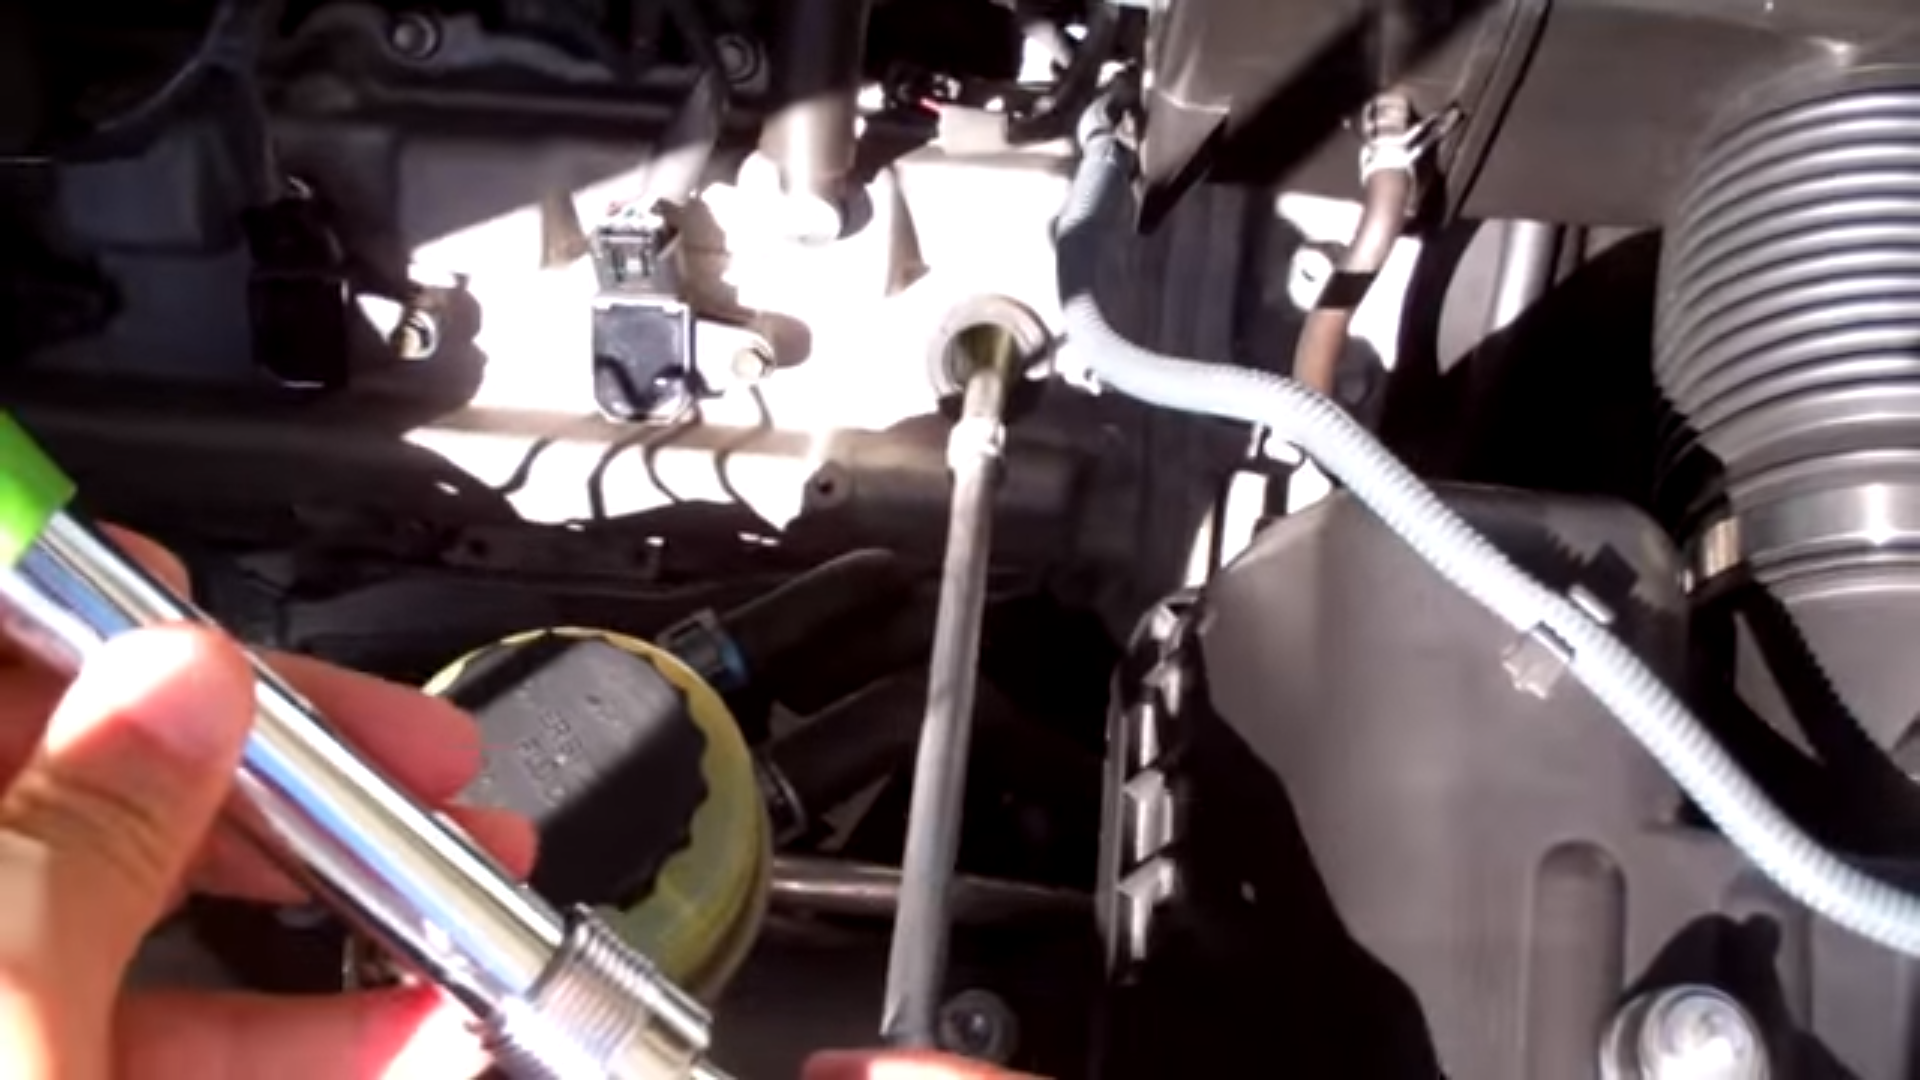 Toyota Tundra: How to Replace Spark Plugs and Ignition Coils | Yotatech